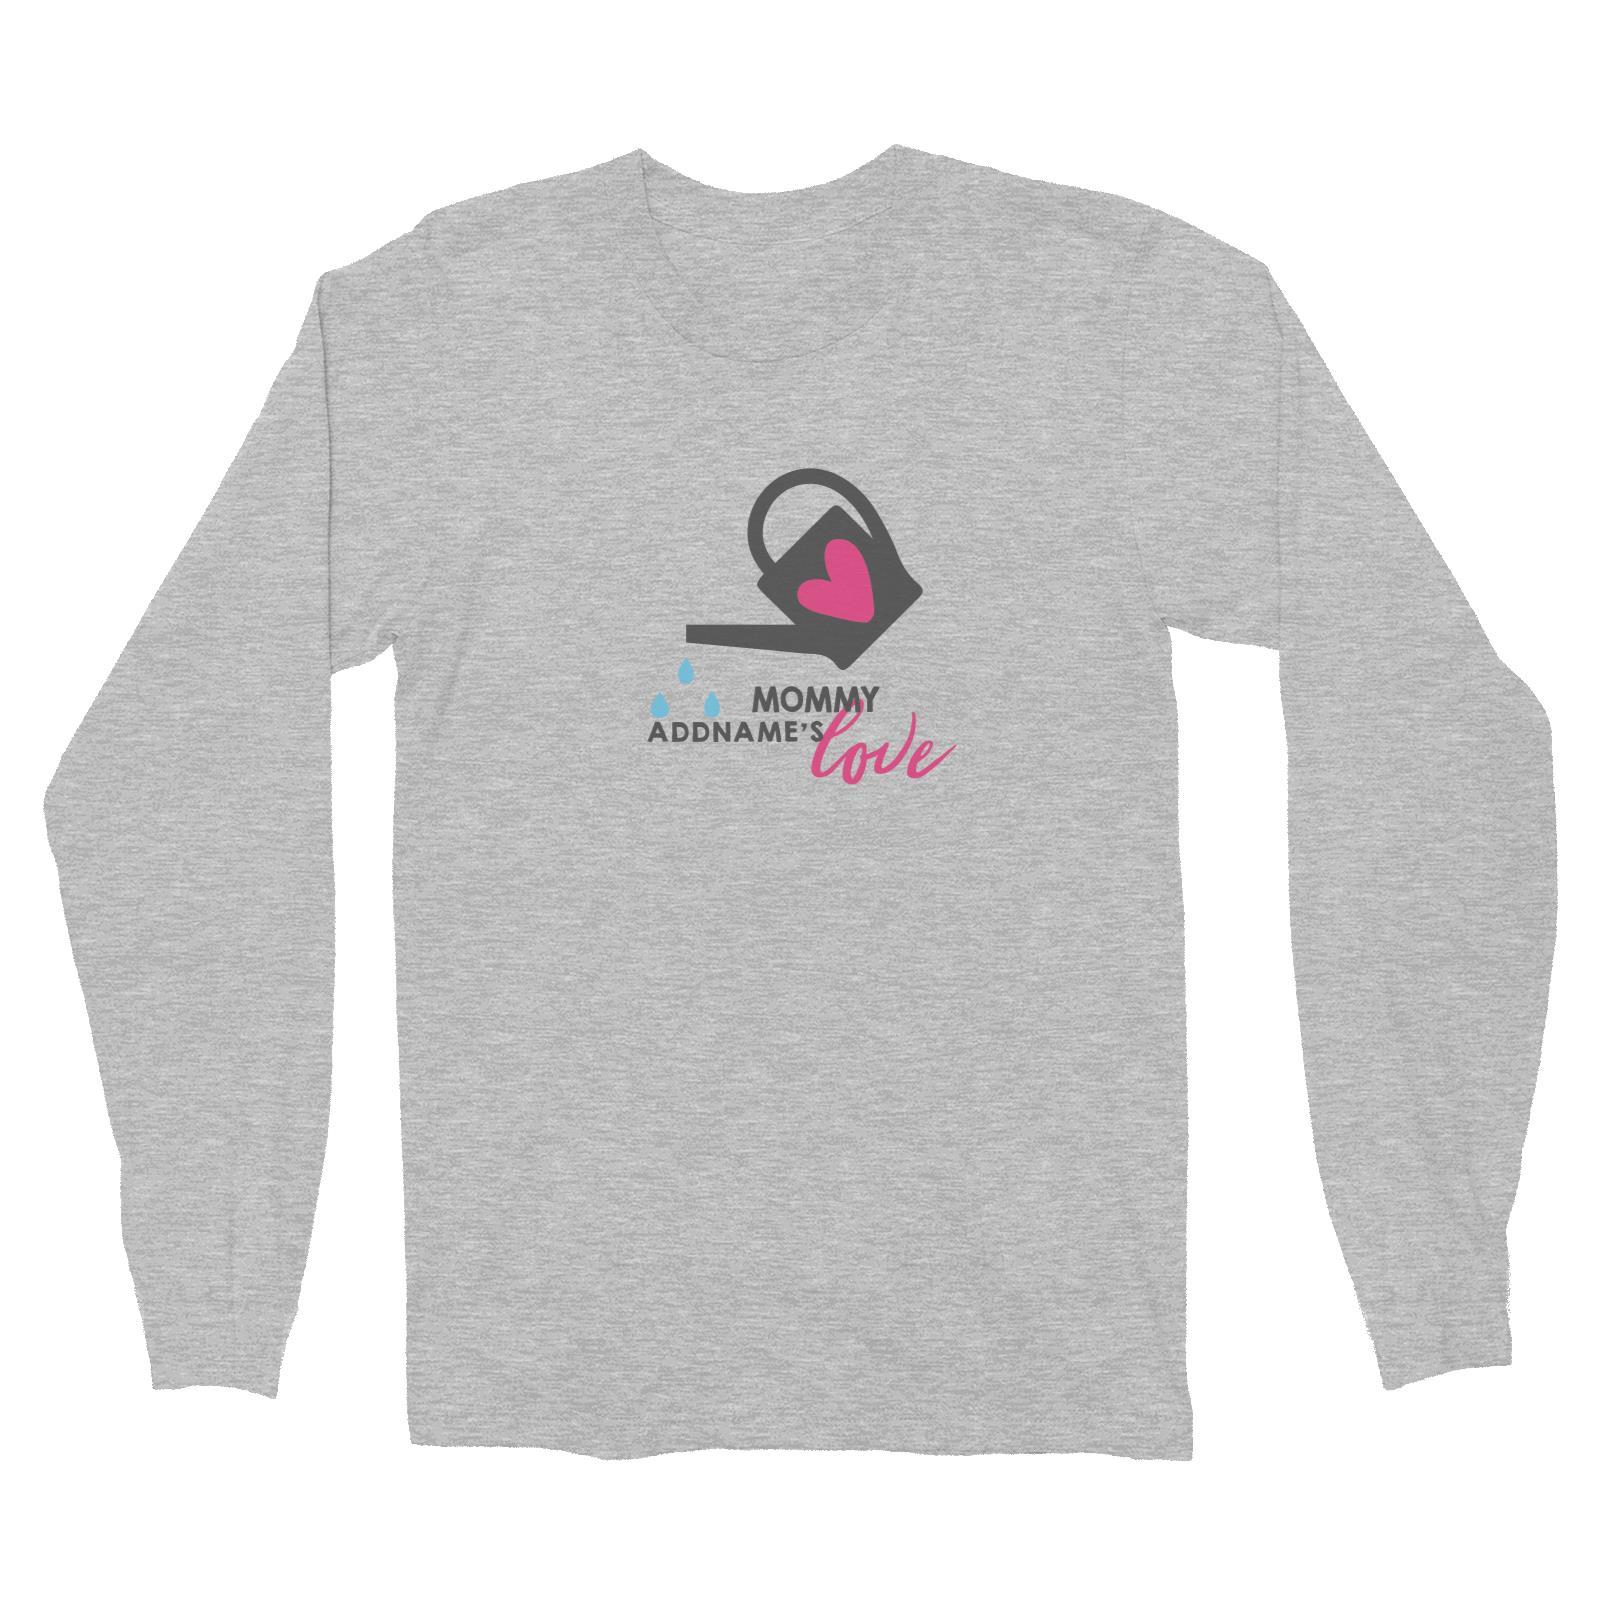 Nurturing Mommy's Love Addname Long Sleeve Unisex T-Shirt  Matching Family Personalizable Designs